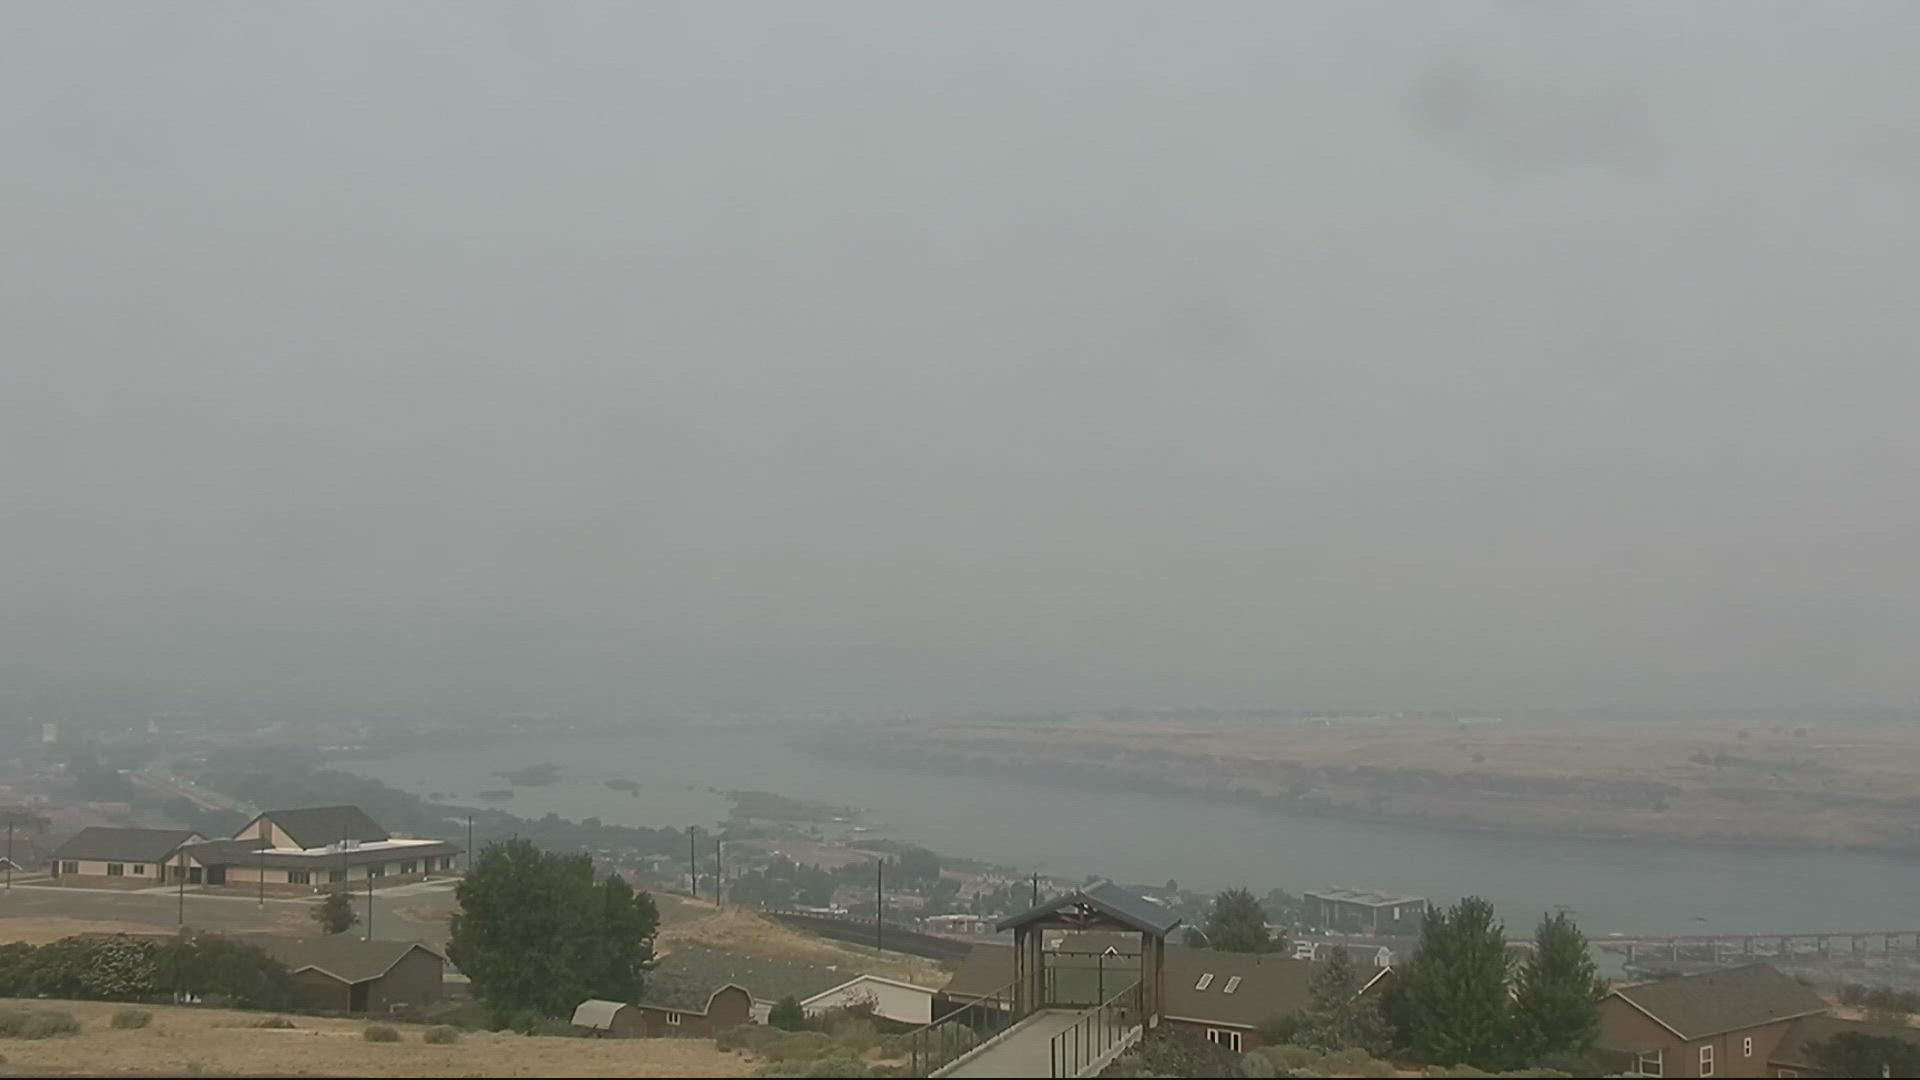 Wildfire smoke and smog prompted officials to issue an air quality advisory for most of the state. KGW's Devon Haskins learned where all the smoke is coming from.